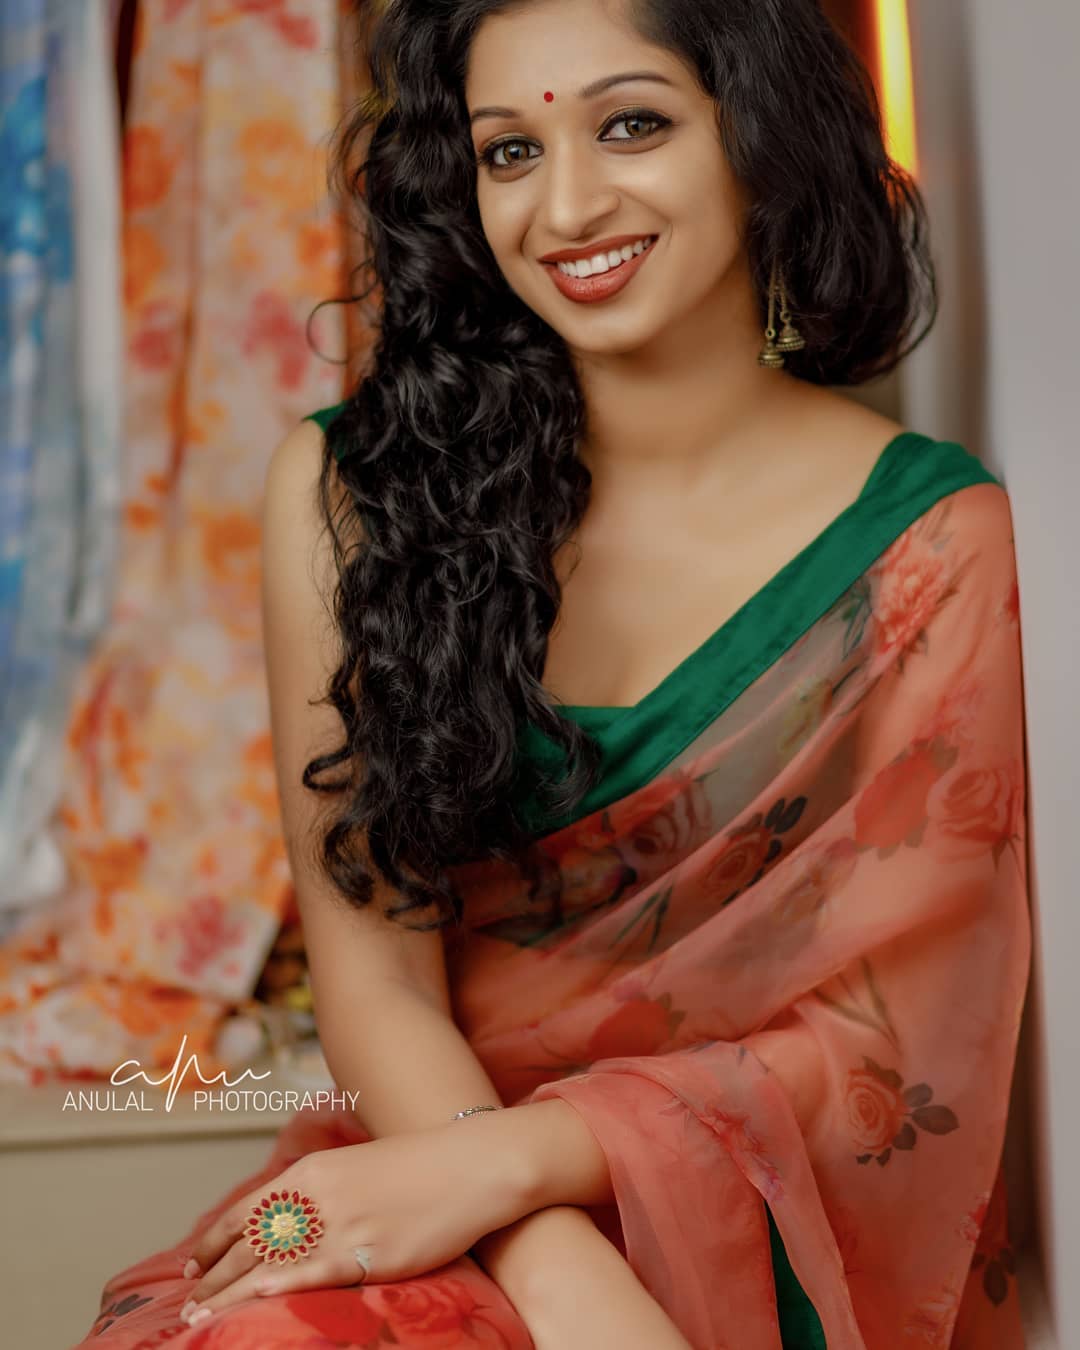 Saree Sexy Photos Haritha Anoop In Saree Cleavage Photo Gallery Photos Hd Images Pictures Stills First Look Posters Of Saree Sexy Photos Haritha Anoop In Saree Cleavage Photo Gallery Movie